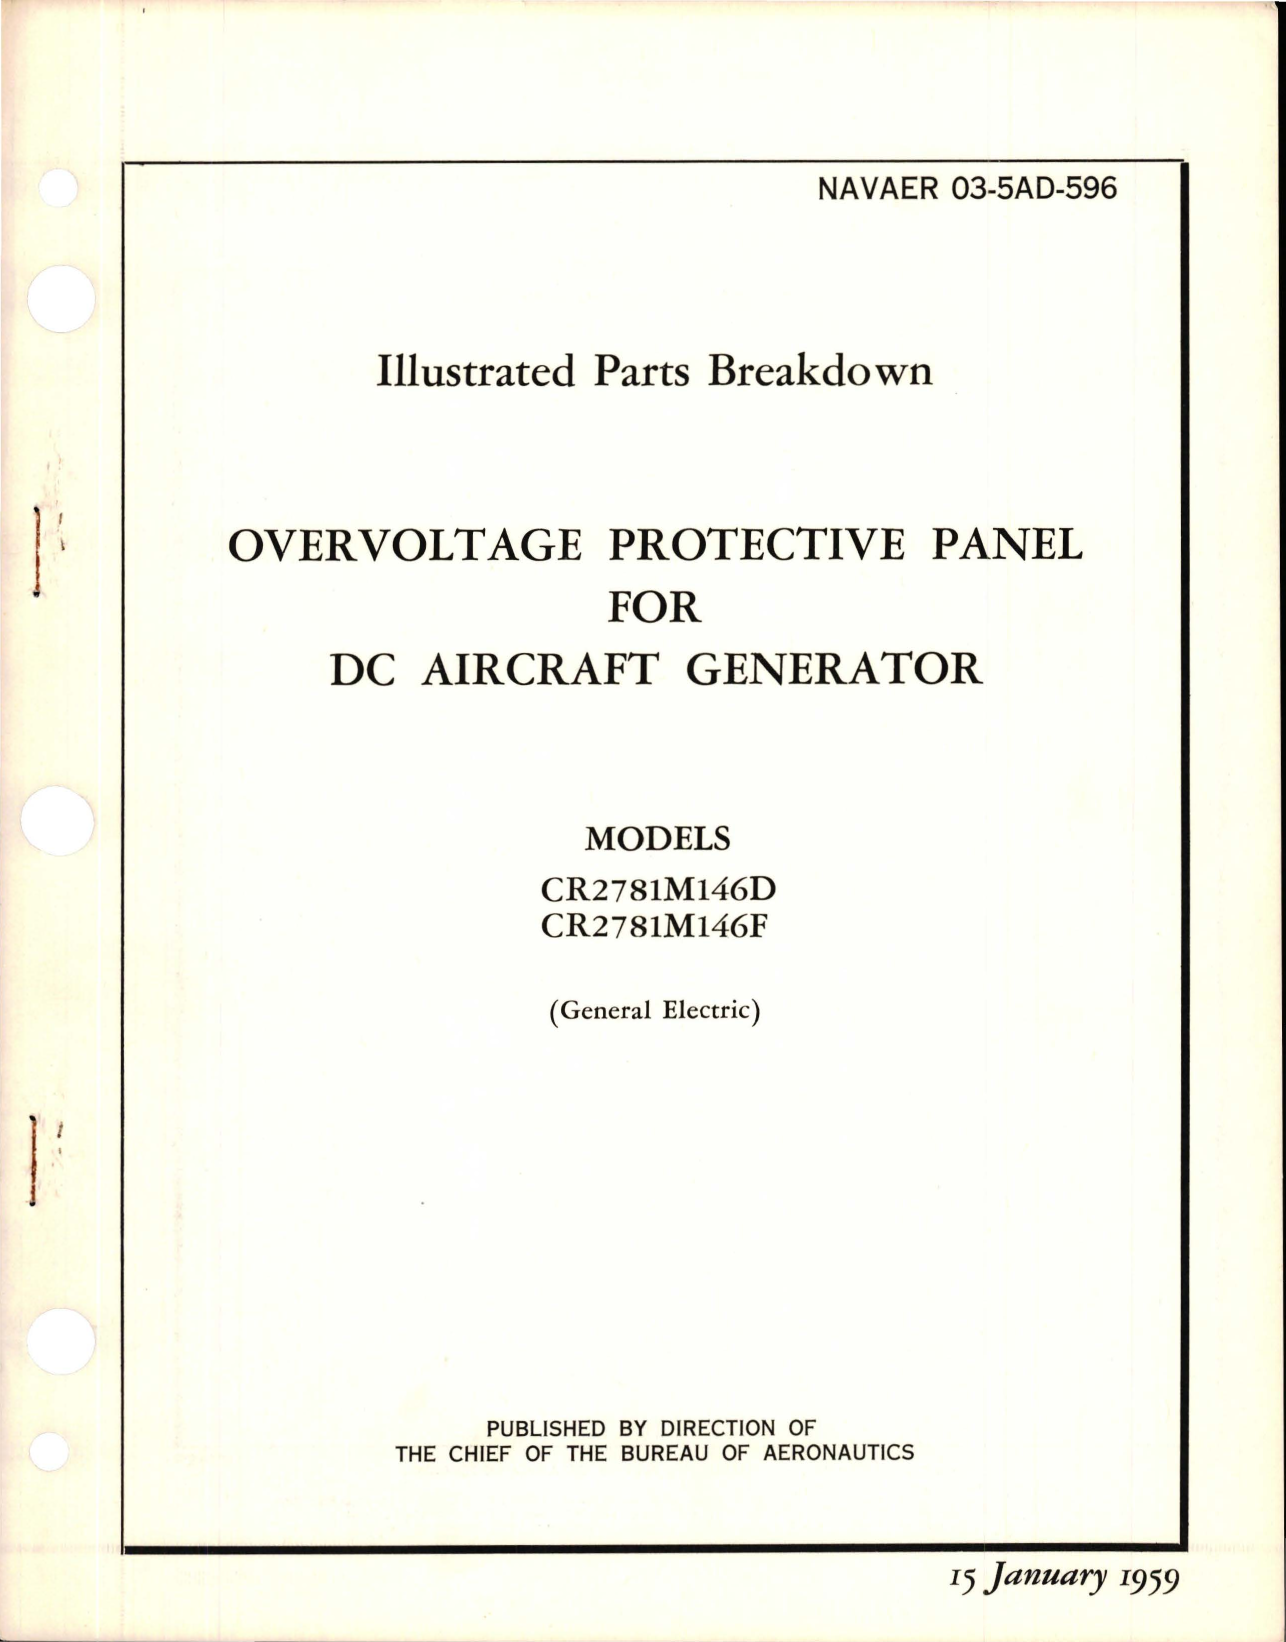 Sample page 1 from AirCorps Library document: Illustrated Parts Breakdown for Overvoltage Protective Panel for DC Generator - Models CR2781M146D and CR2781M146F 